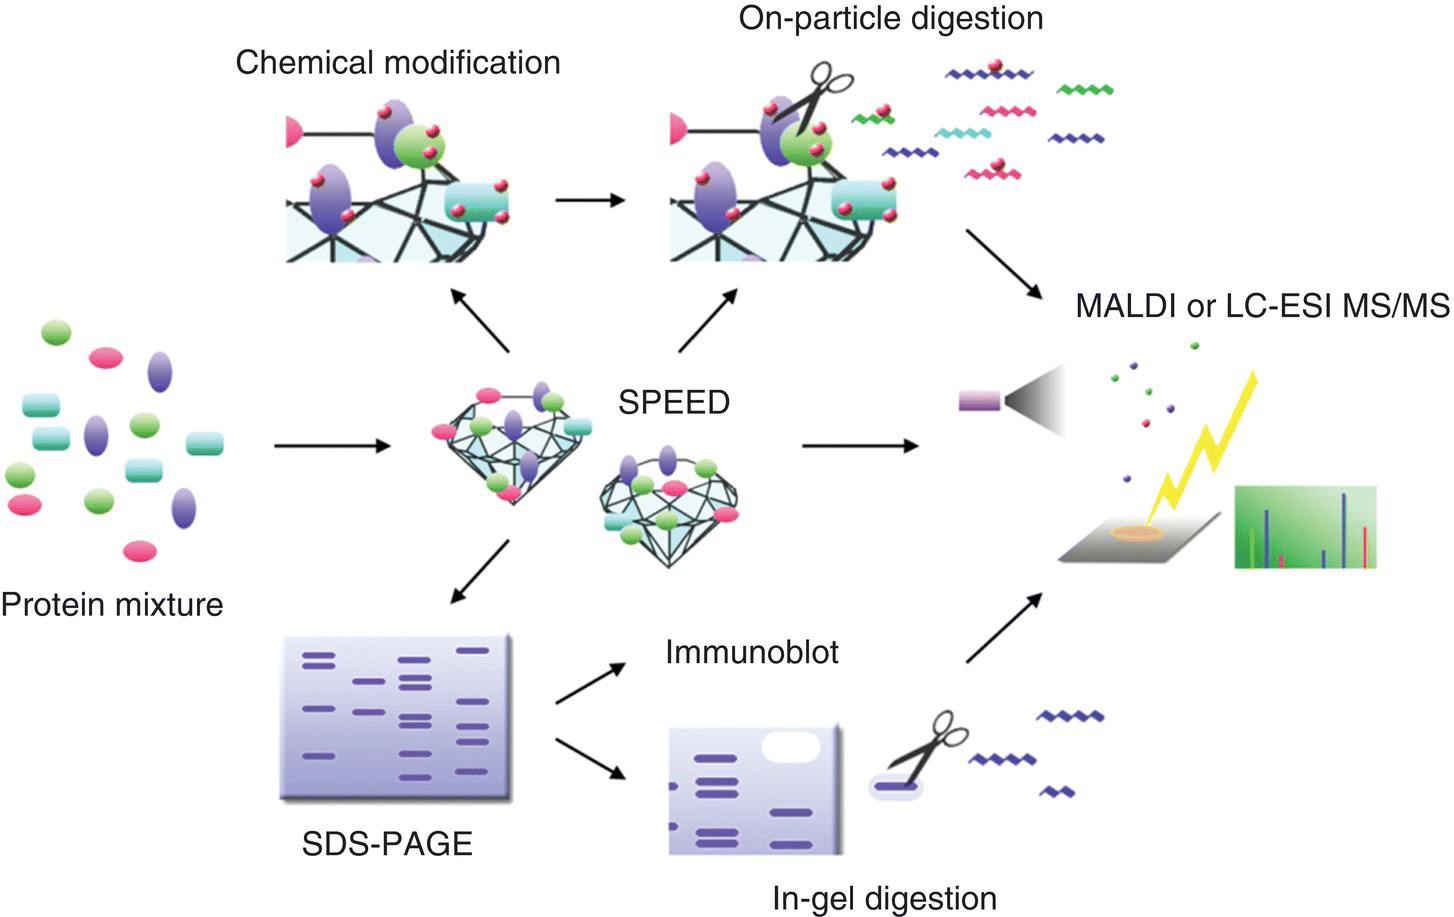 Illustration of typical applications of the SPEED platform to proteome analysis, with arrow from a protein mixture to speed, then to SDS-Page, chemical modification, on-particle digestion, immunoblot, etc.